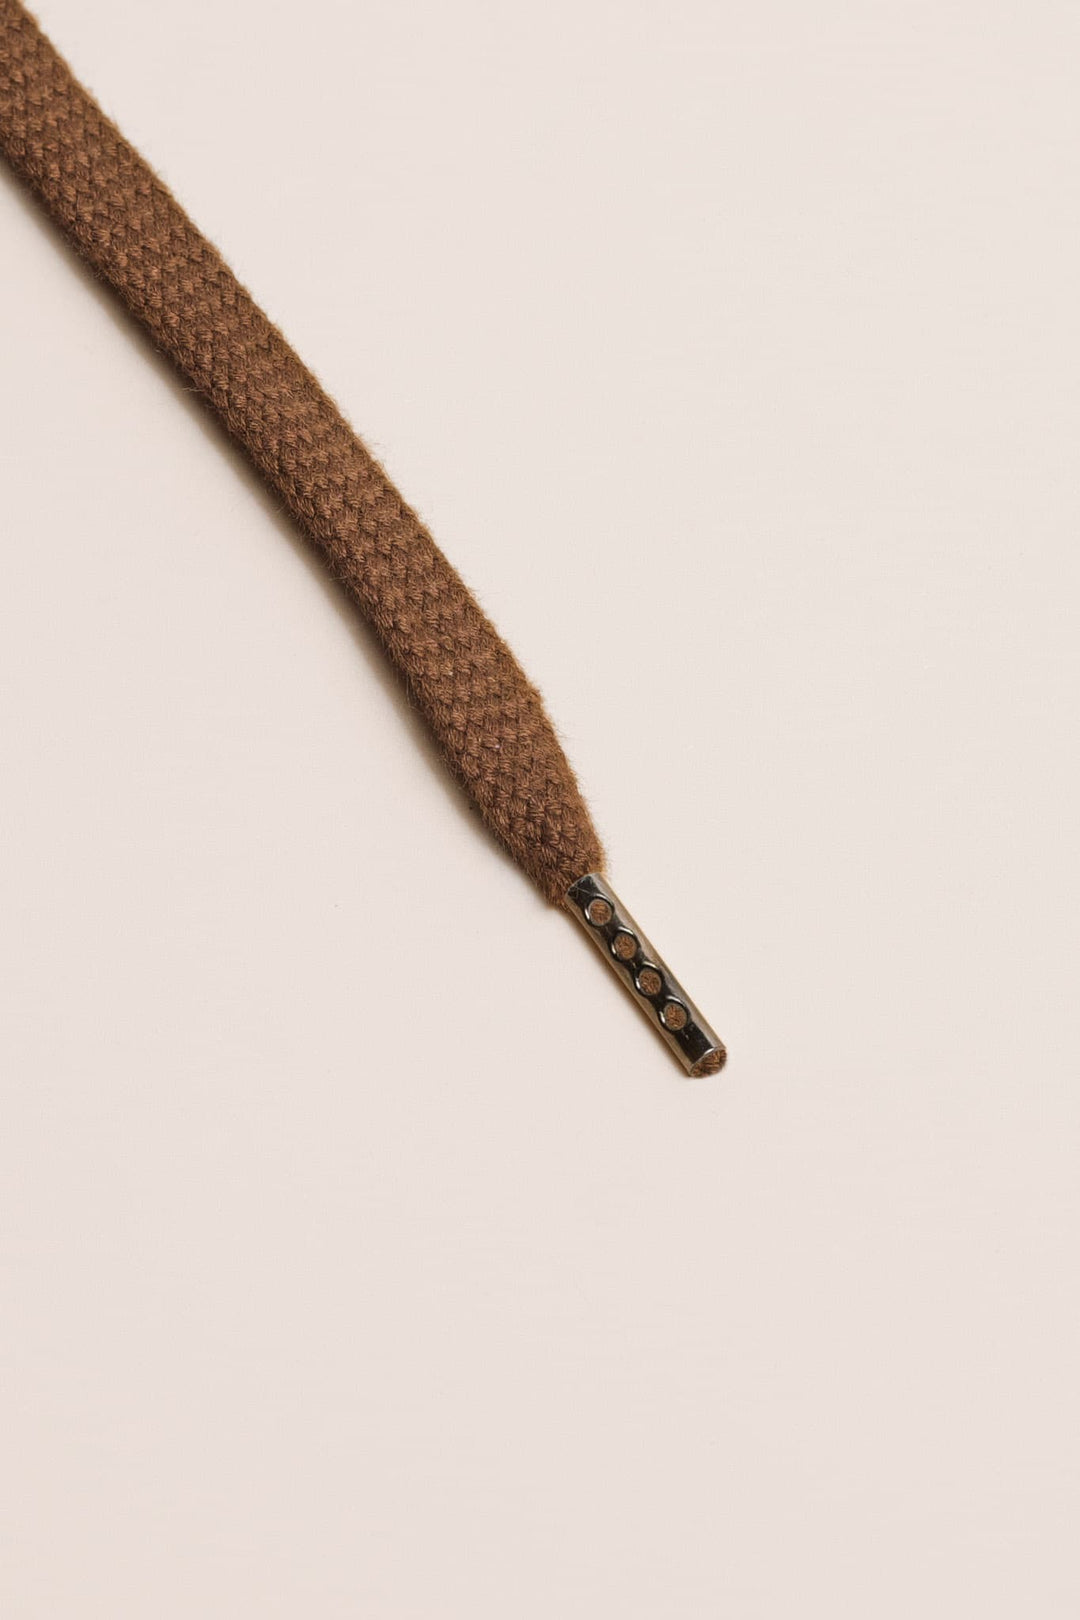 Light Brown - Sneaker Laces